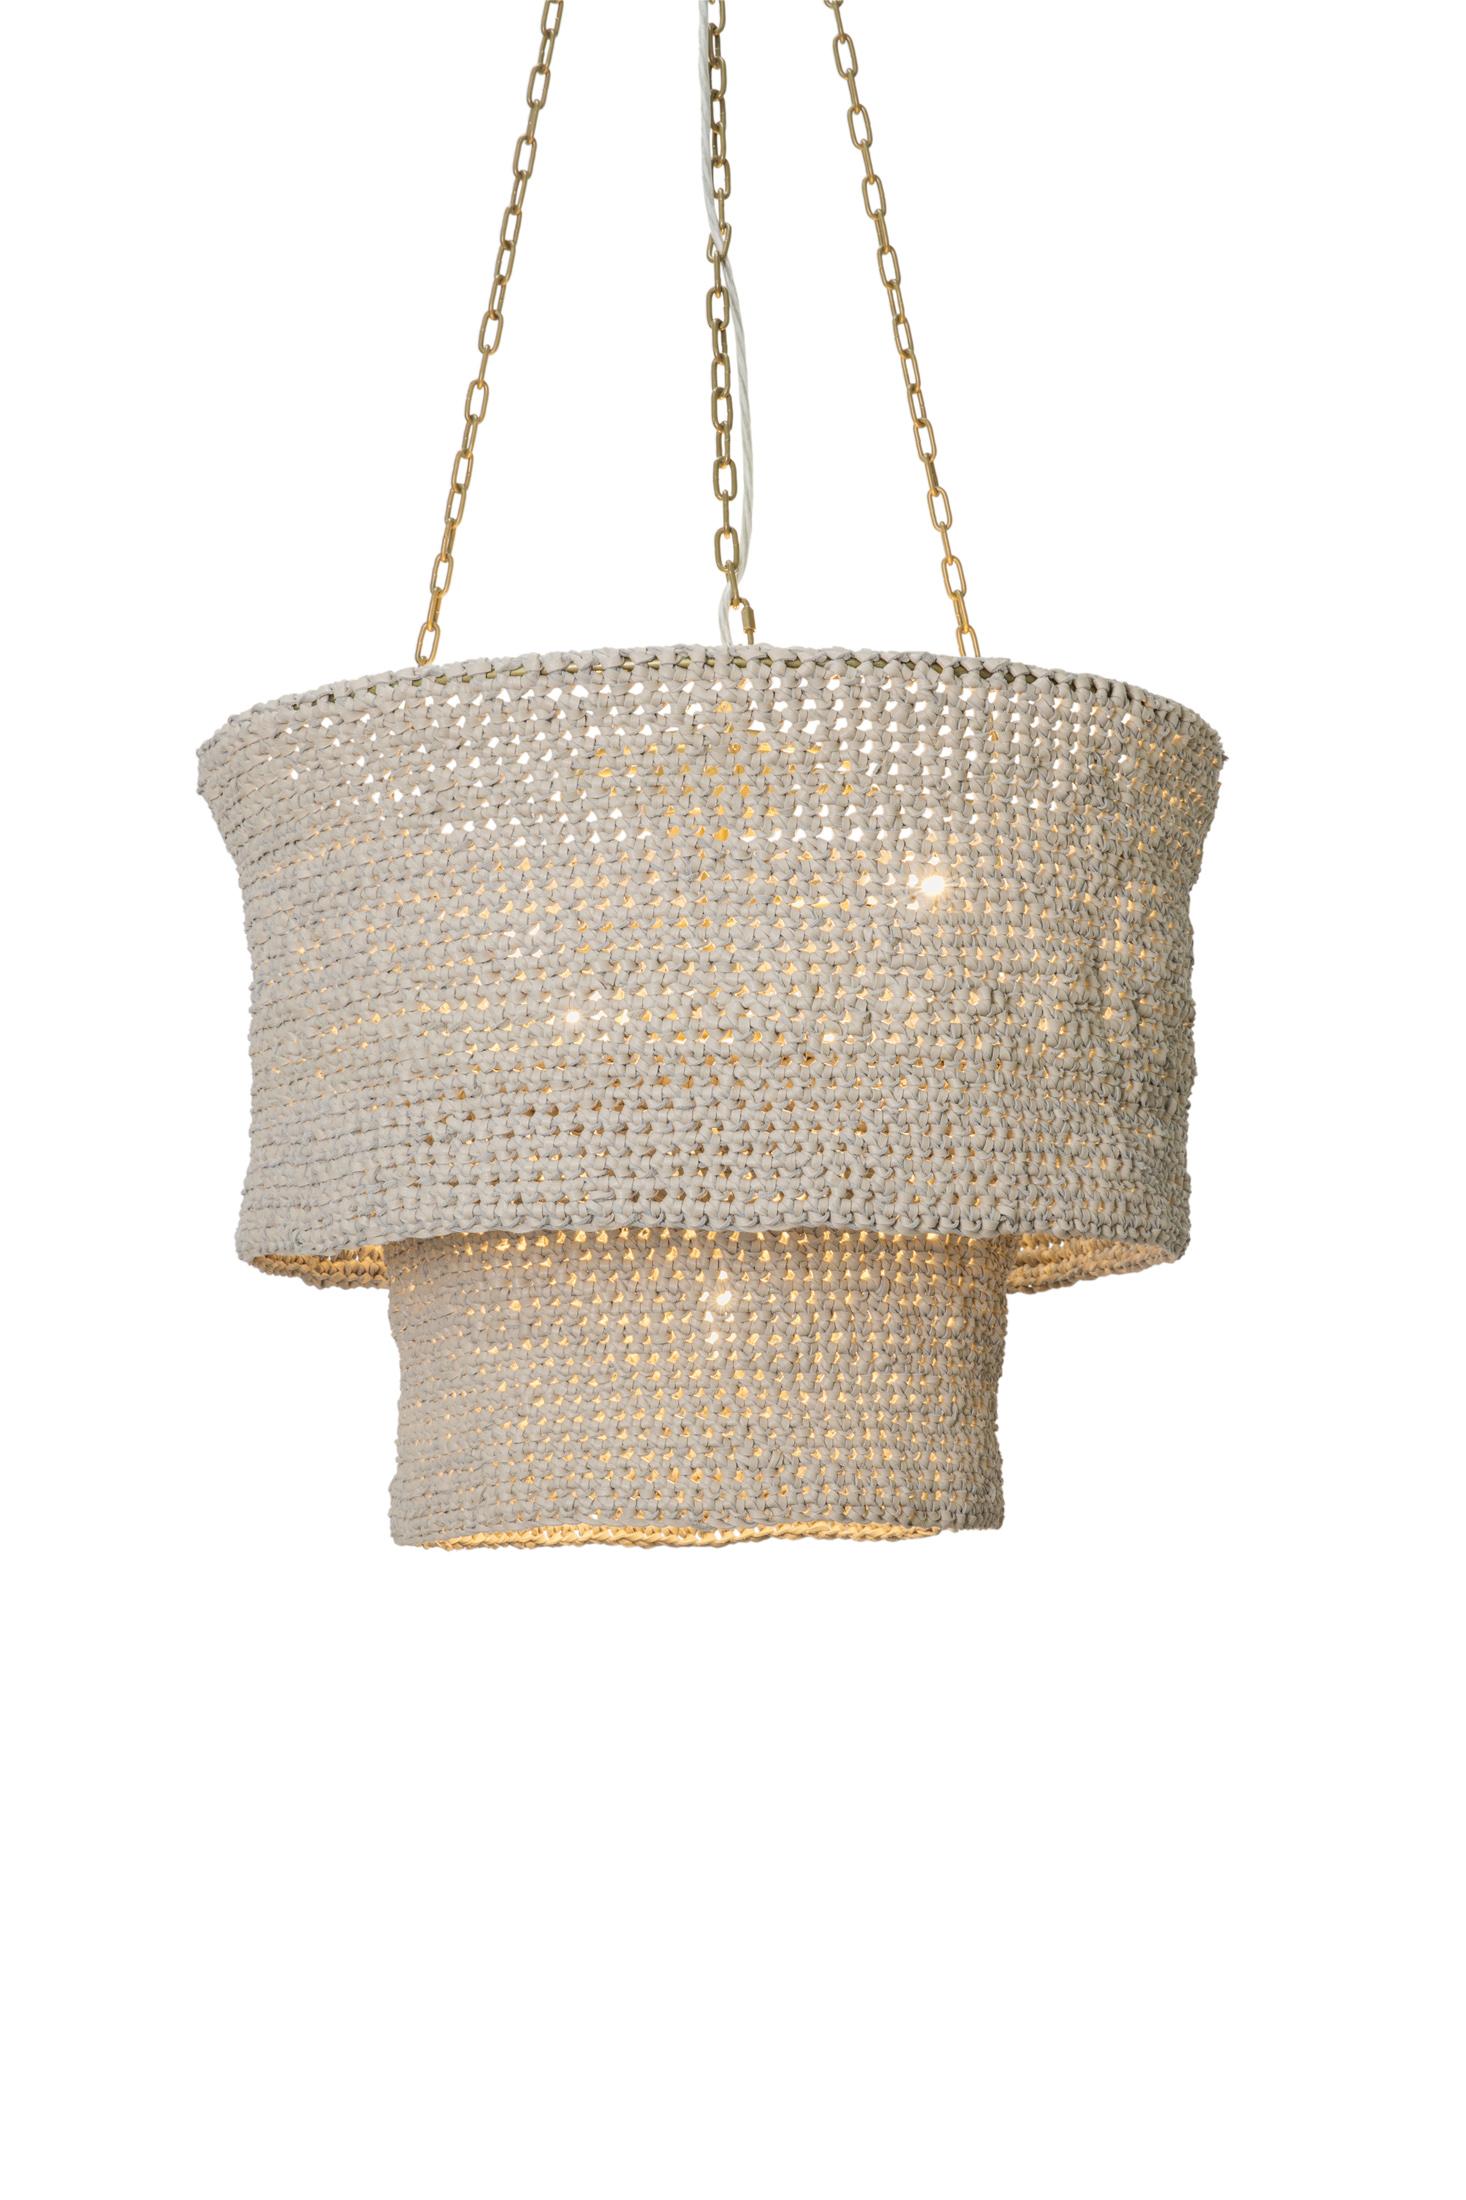 Kubili Crocheted Leather Tiered Chandelier in Cream-Stone Leather